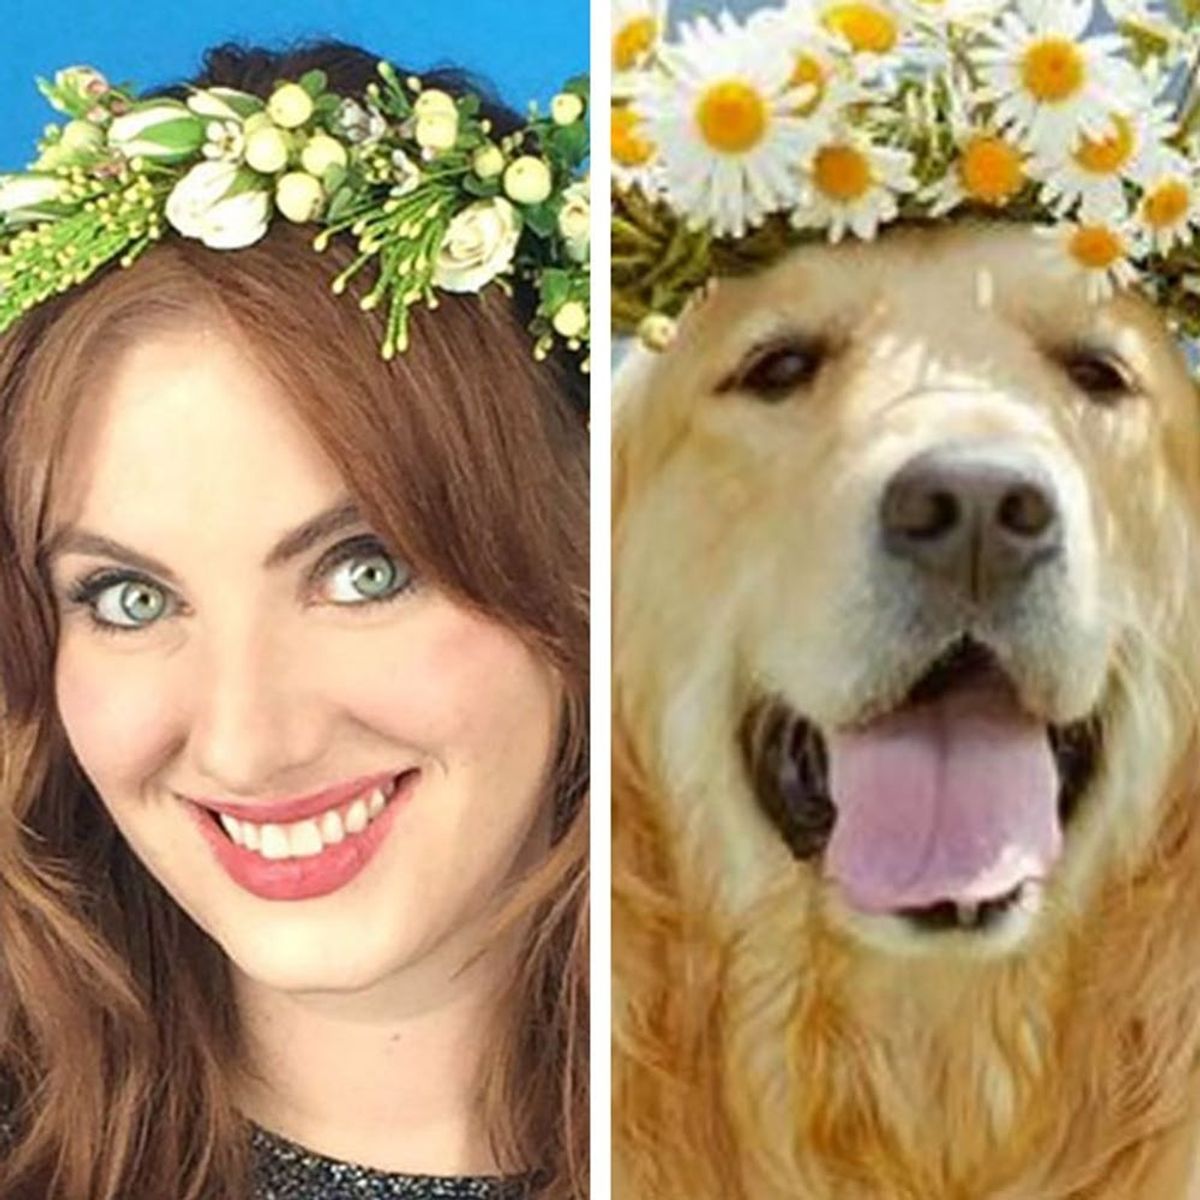 Twitter Account You Are Dog Now Will Match You With Your Dog Doppelganger